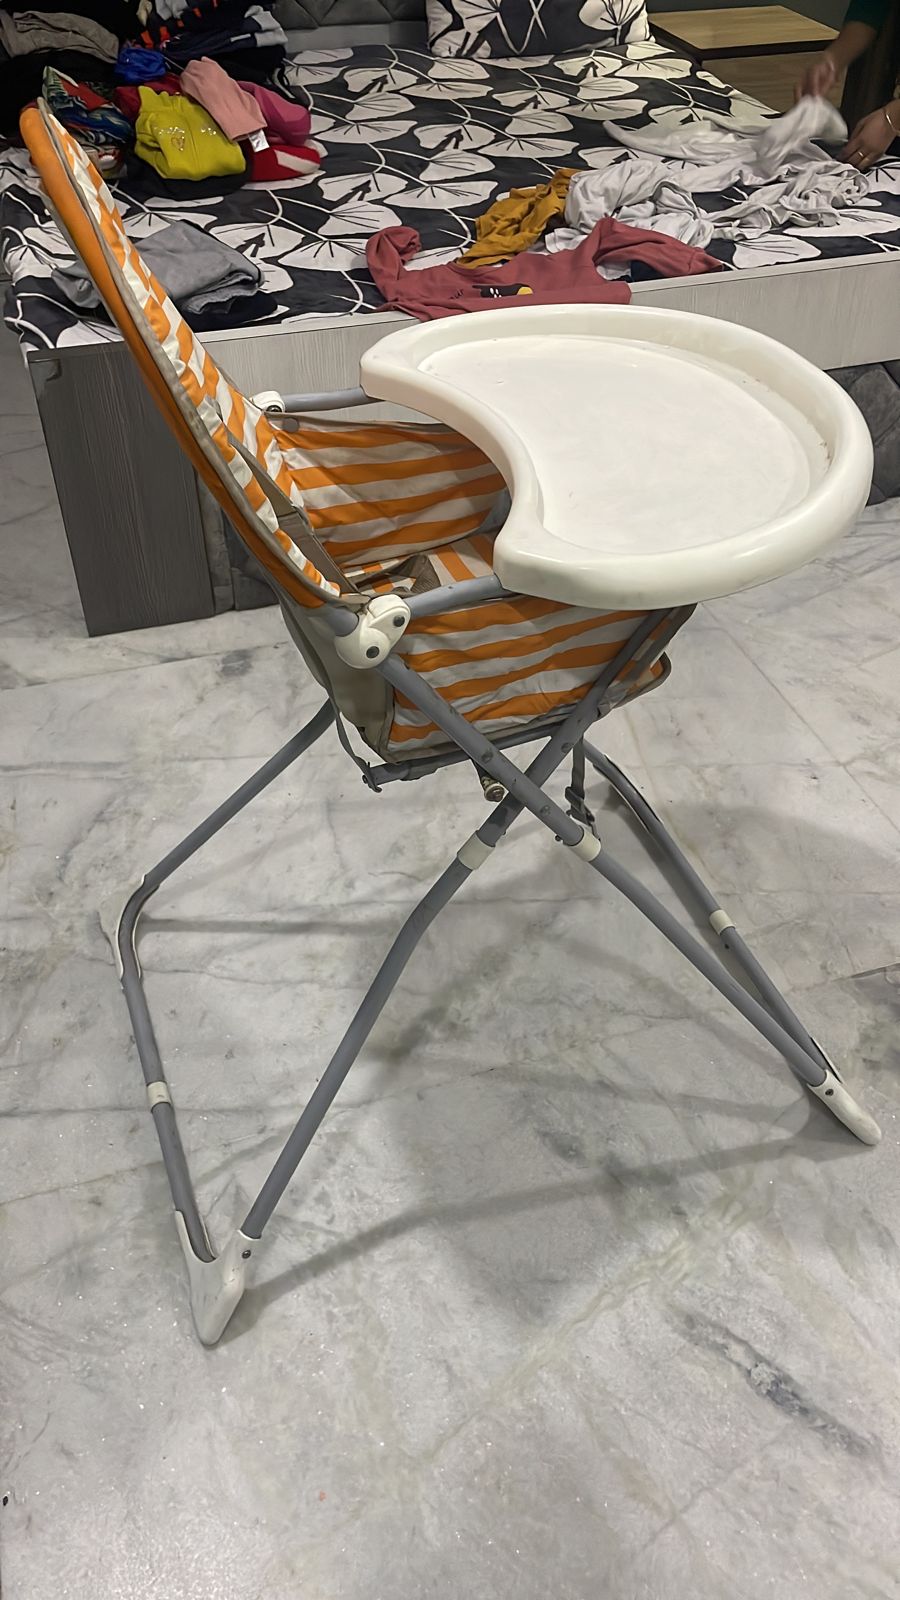 Mothercare England wd24 6sh High Chair